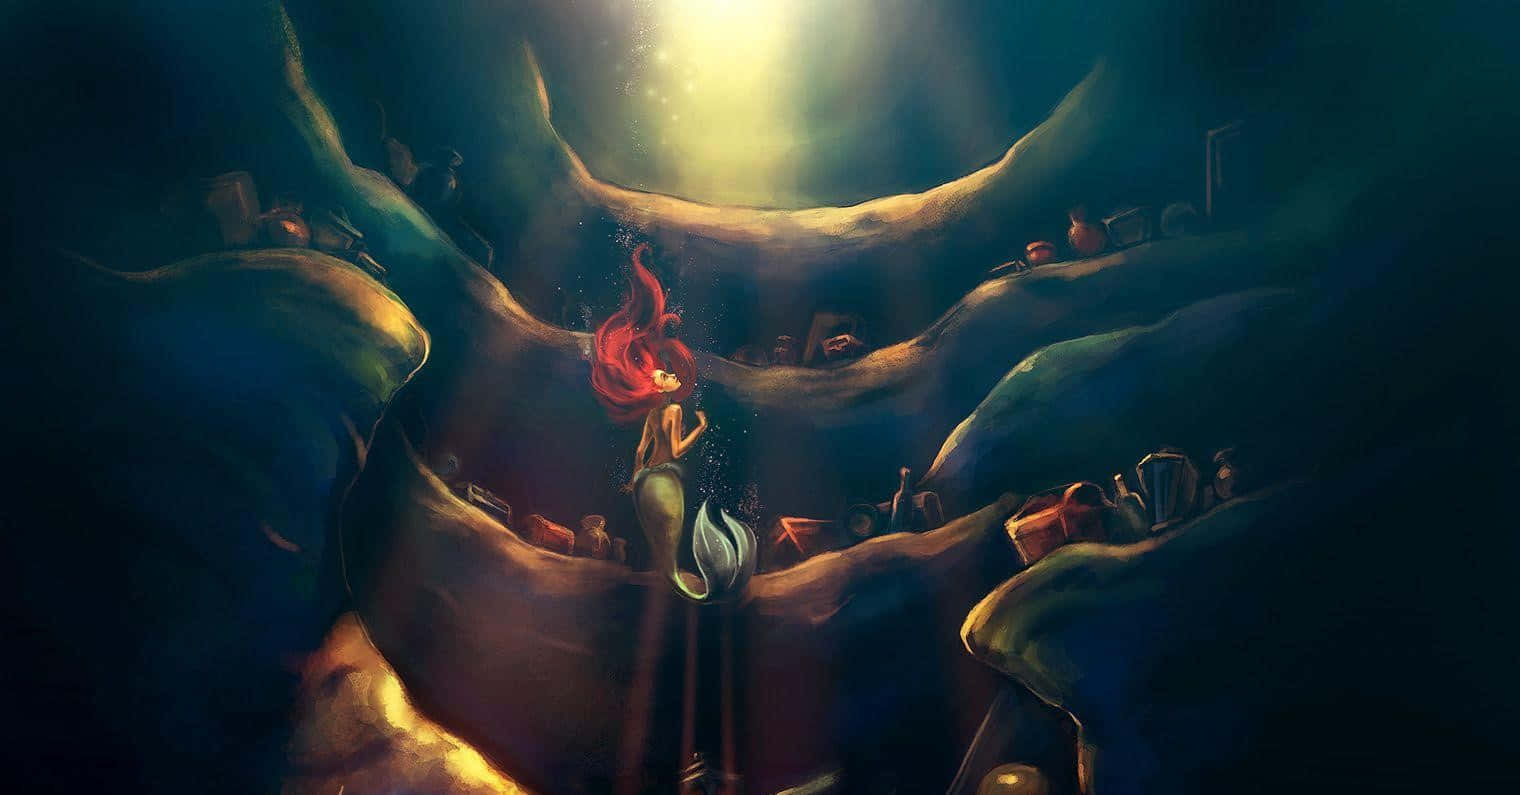 A magical moment from Disney's The Little Mermaid Wallpaper